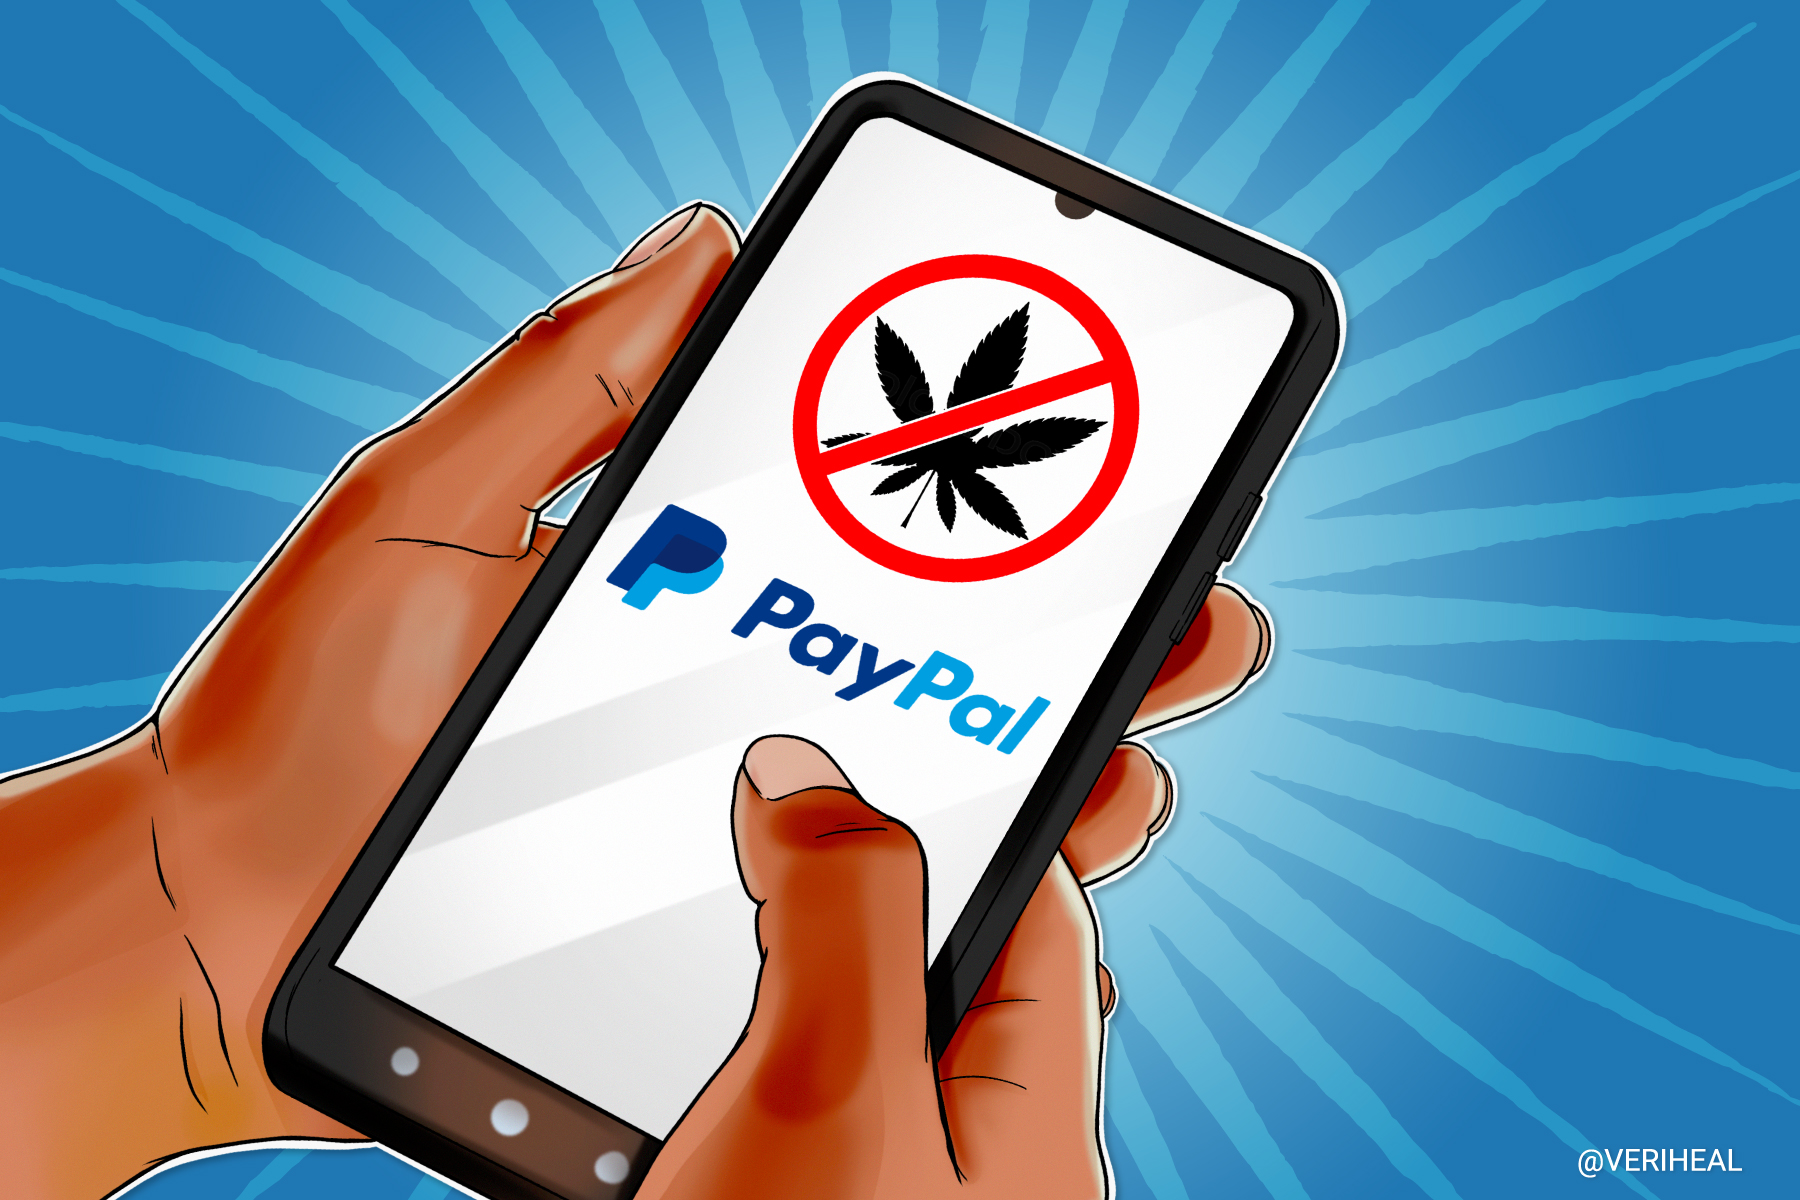 Paypal Embraces the Stigma Against Cannabis Industry Professionals